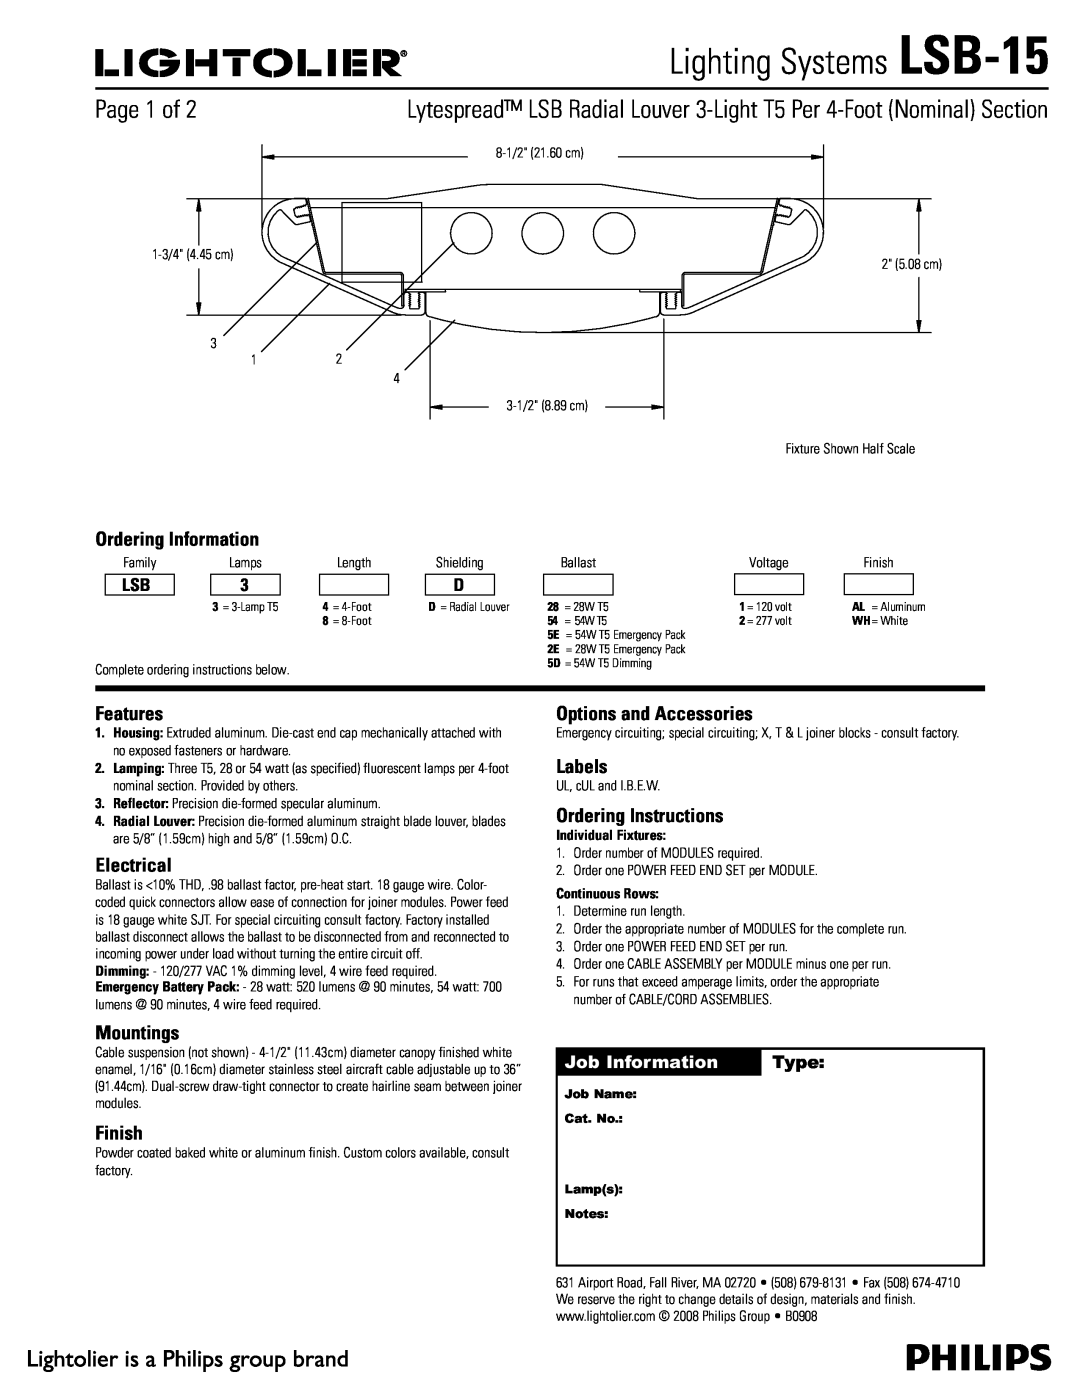 Lightolier LSB-15 manual 1BHFPG, Ordering Information, Features, Electrical, Mountings, Finish, Labels, Type 